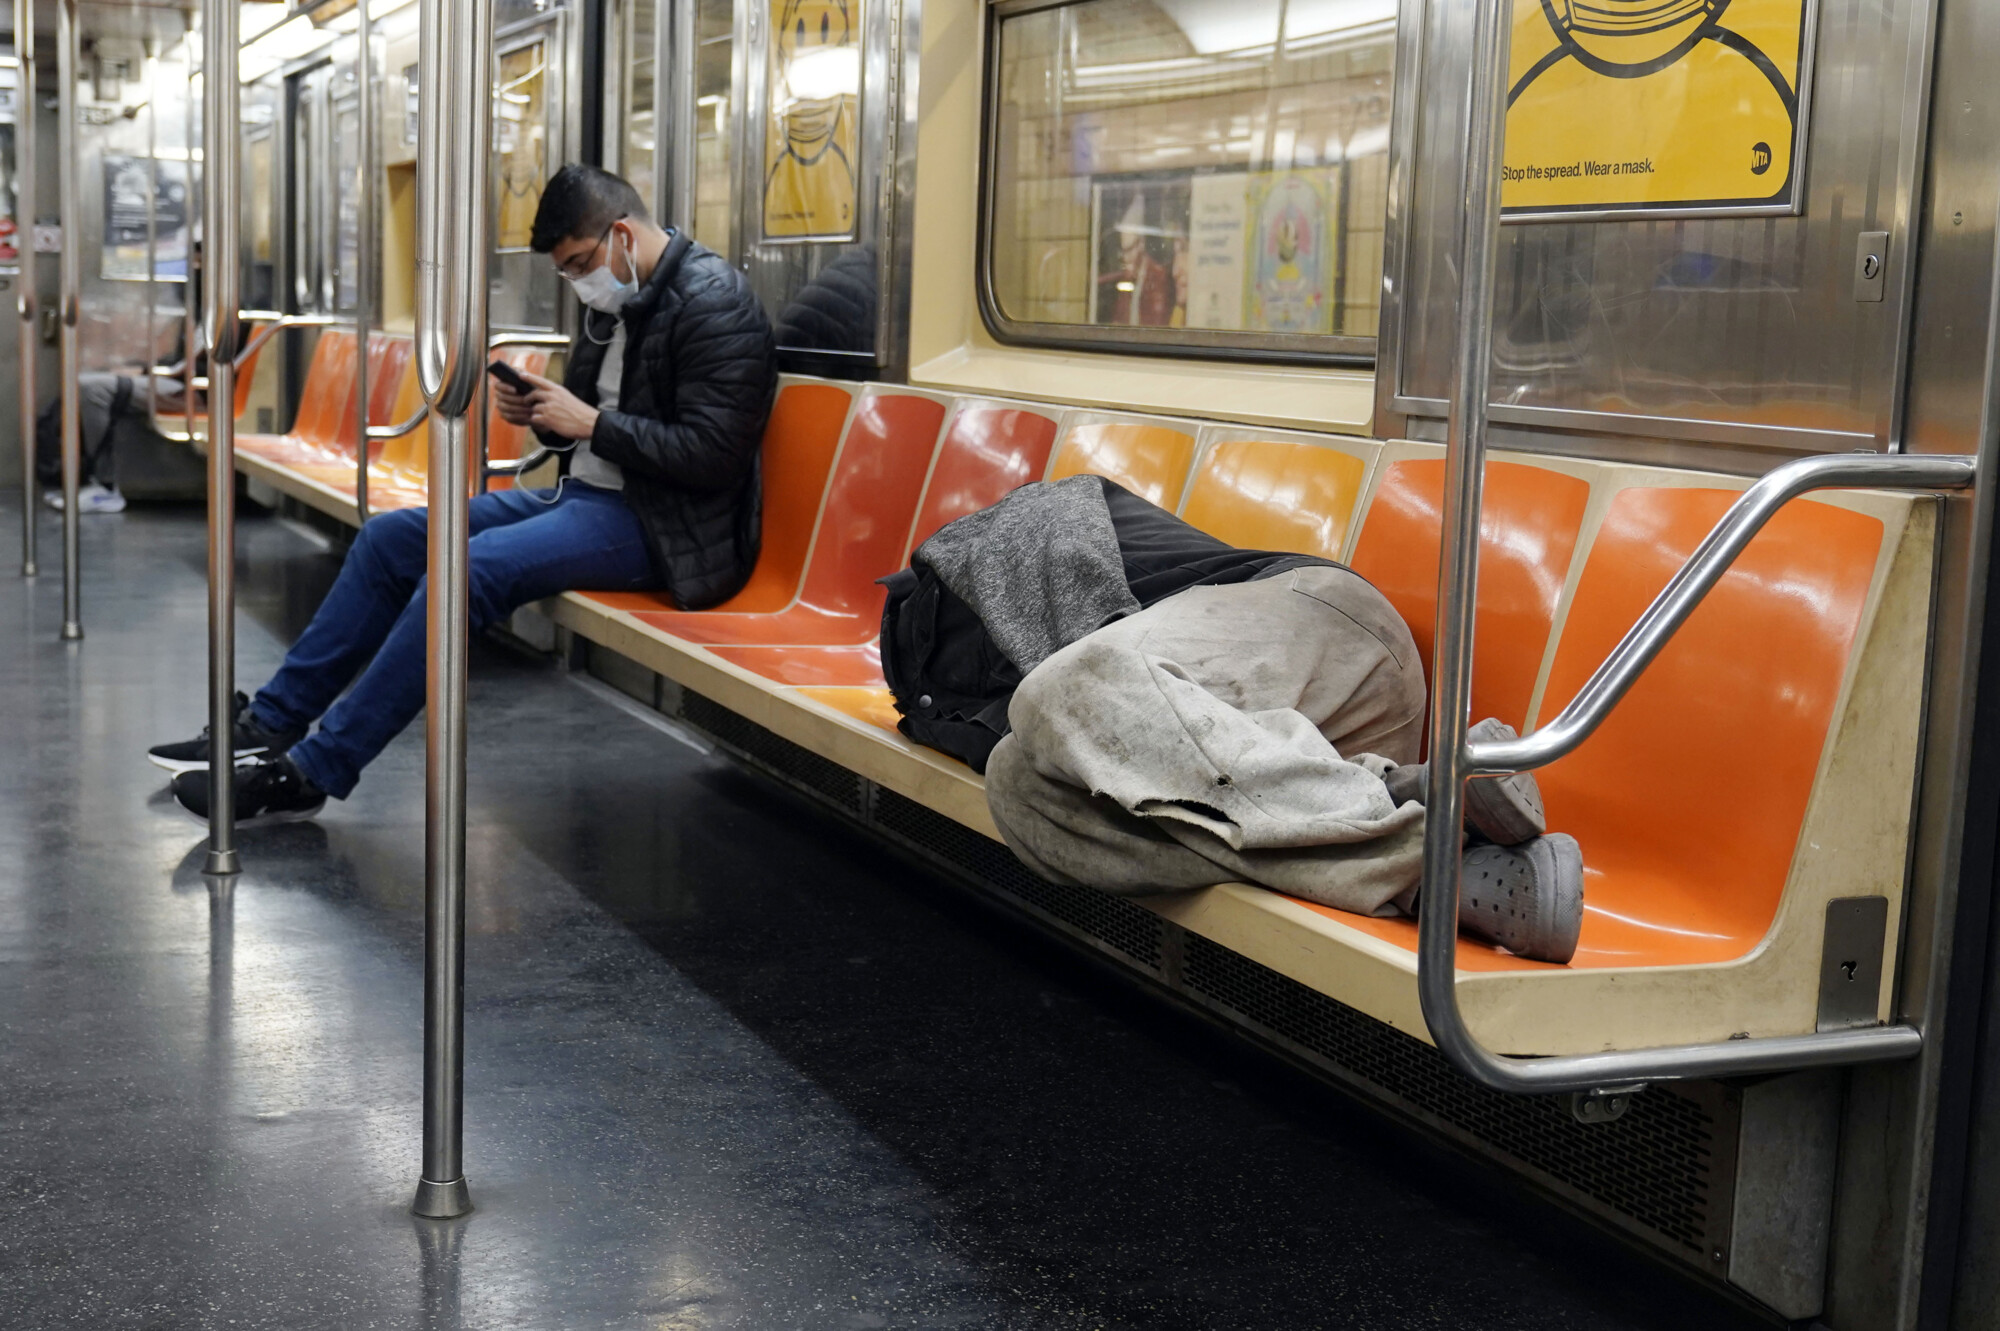 NYC to Remove Mentally Ill Homeless for Psychiatric Evaluation: Mayor